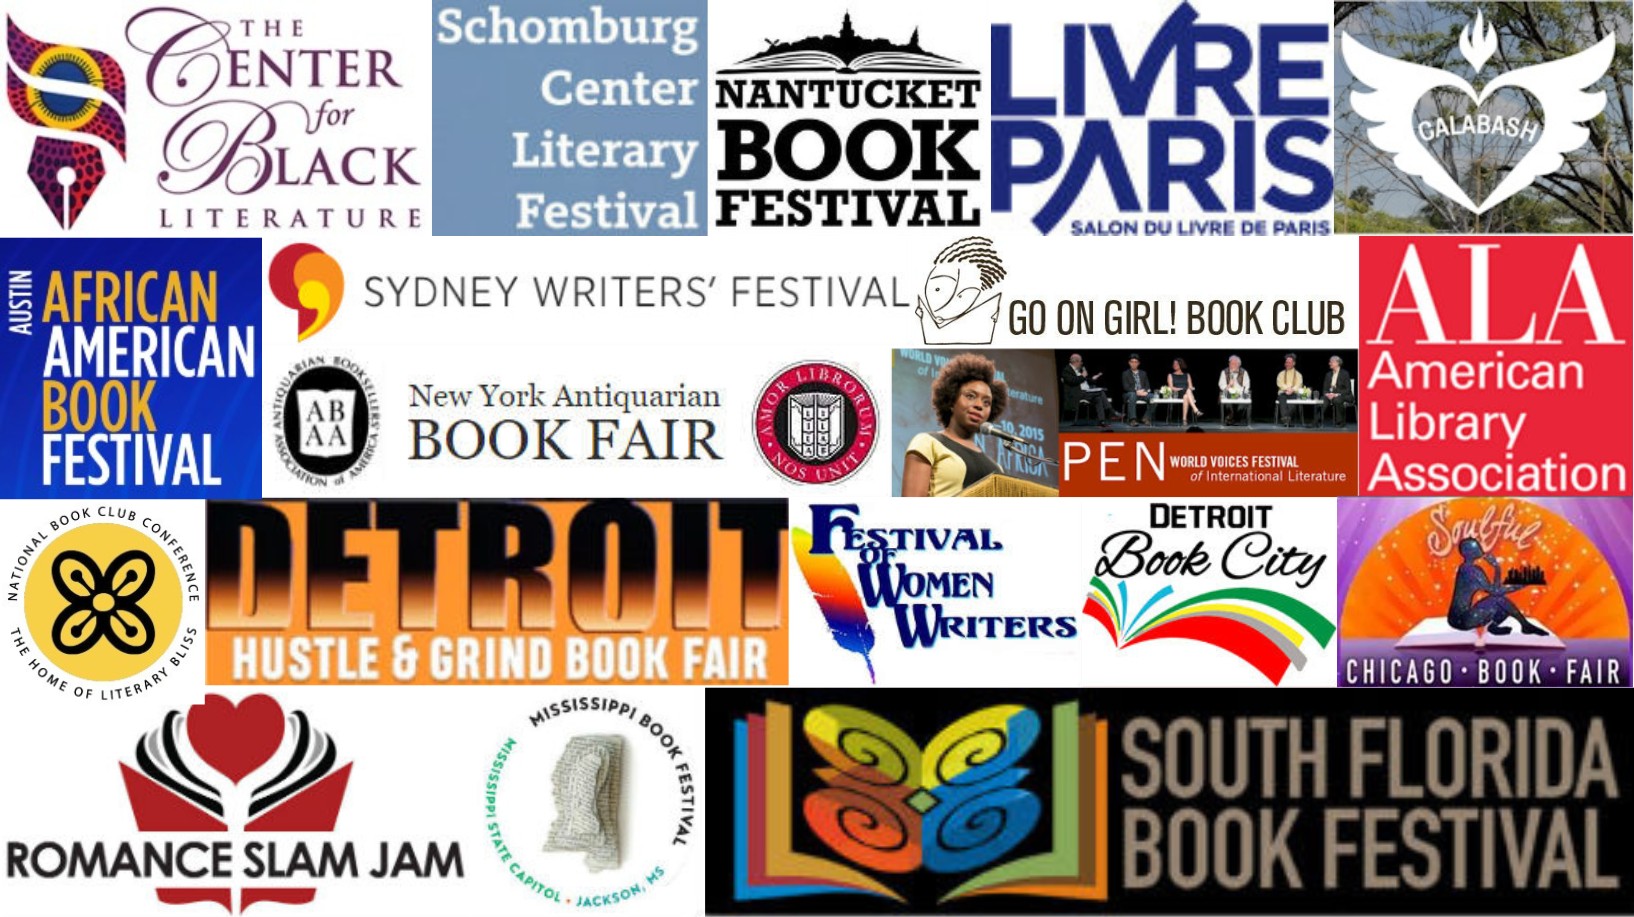 Discover Author Book Event Events & Activities in Atlanta, GA